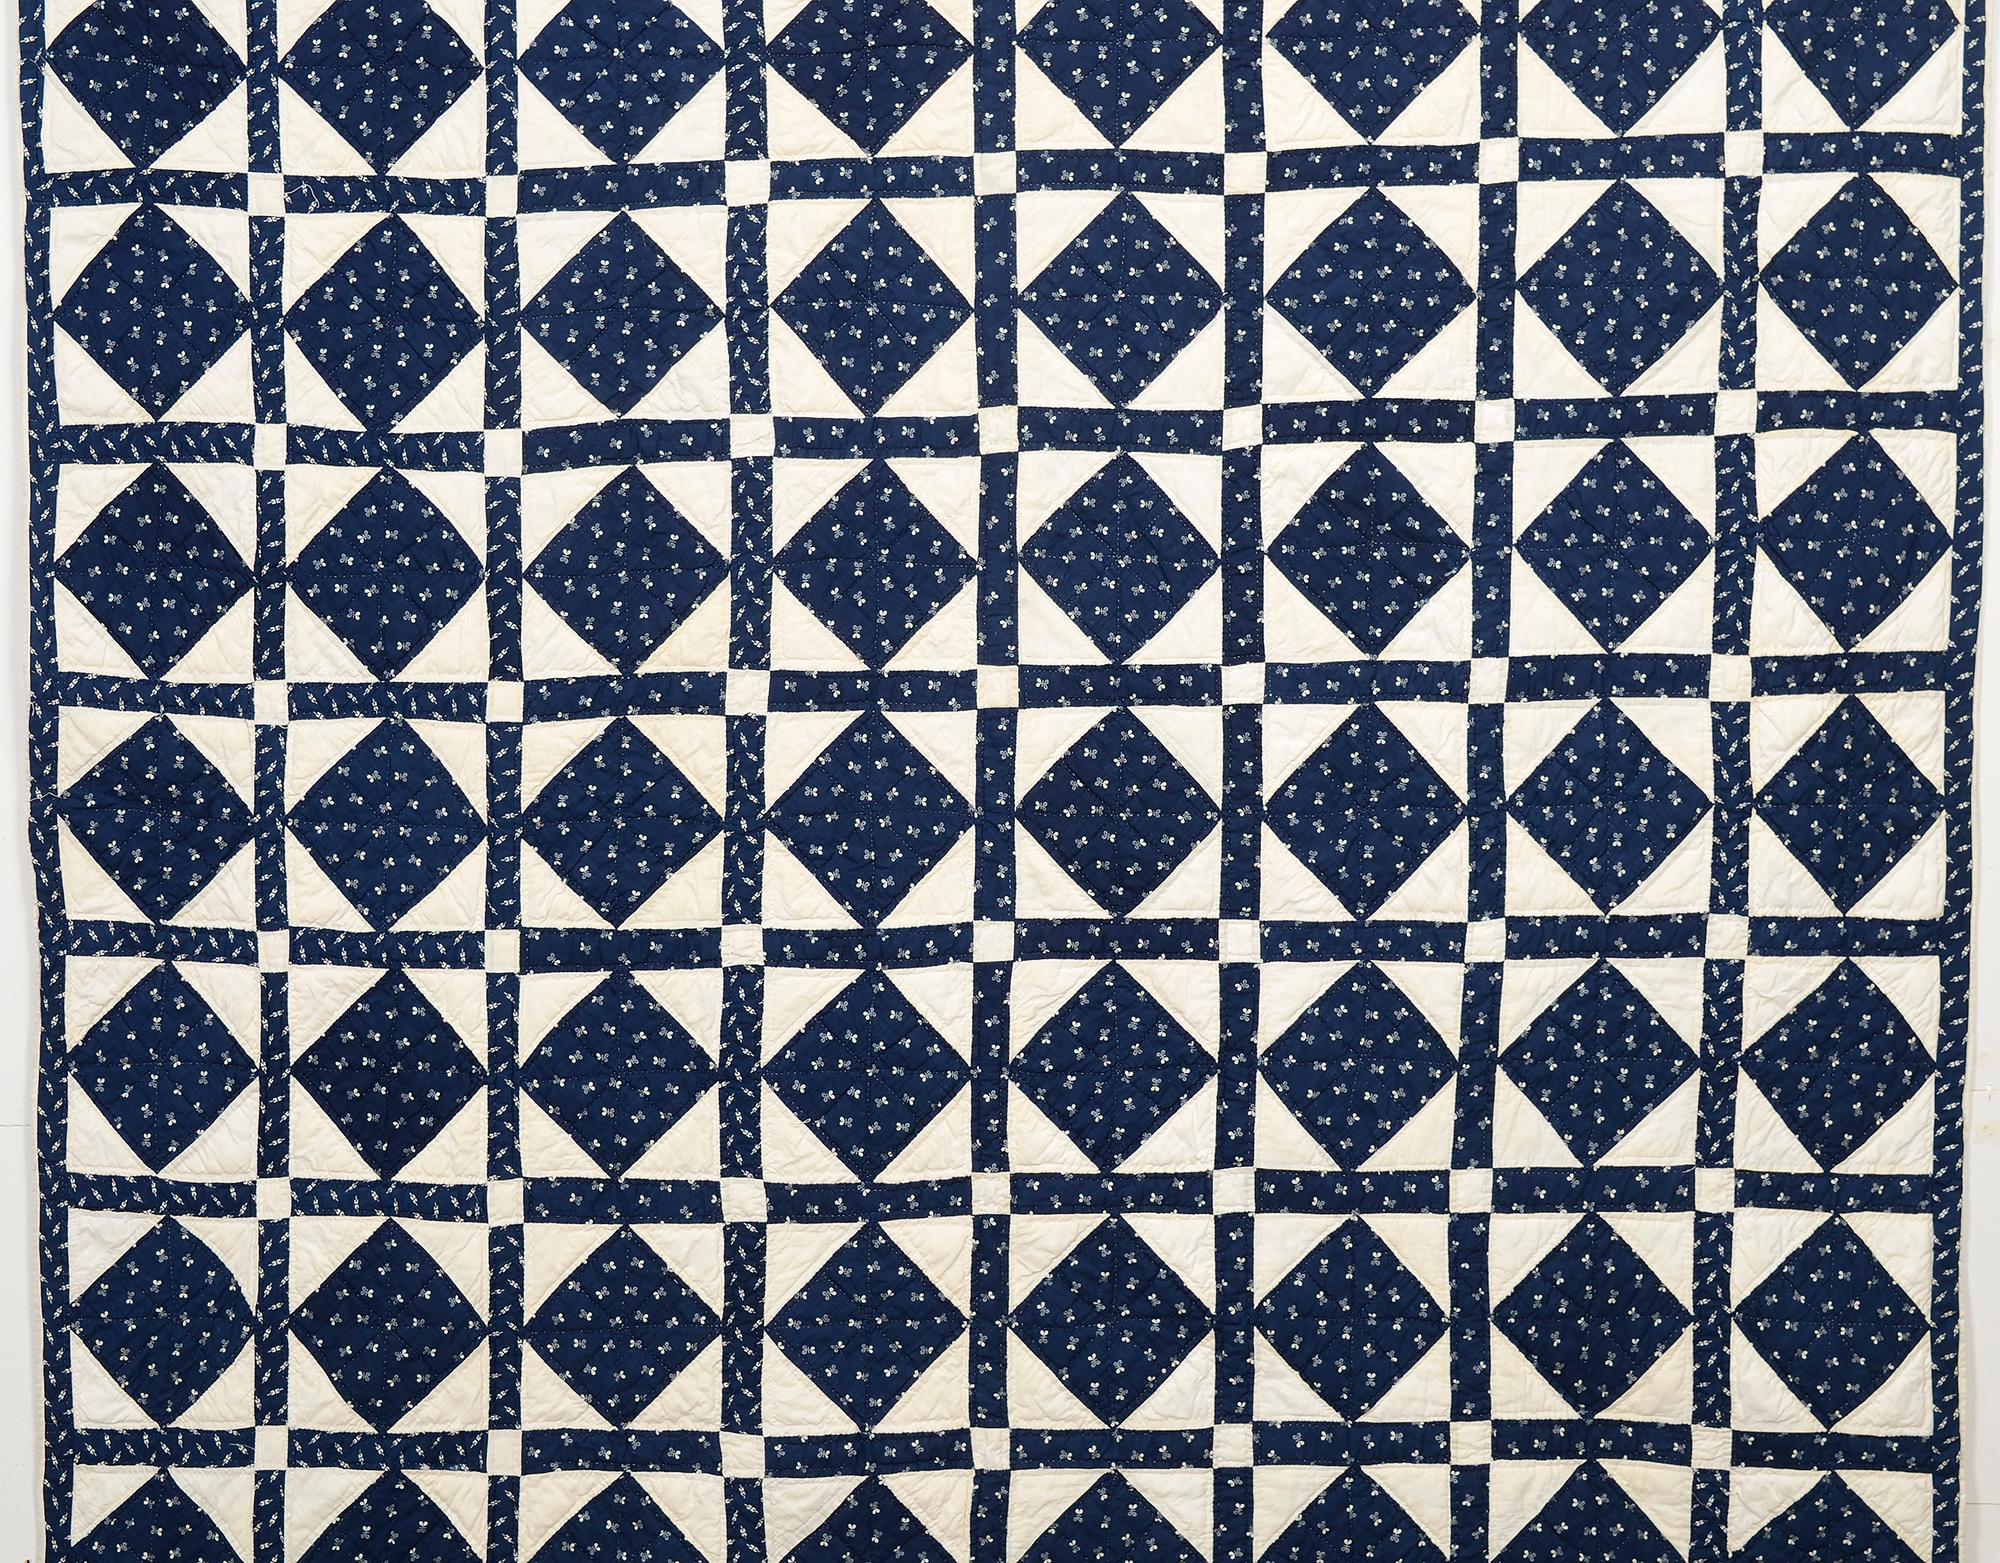 This Economy Patch quilt (aka Diamond in a Square) has a secondary pattern as well. The four triangles adjoining the indigo diamond unite around the sashing to form the pattern known as Texas Puzzle. It is not evident at first, but the pattern has a